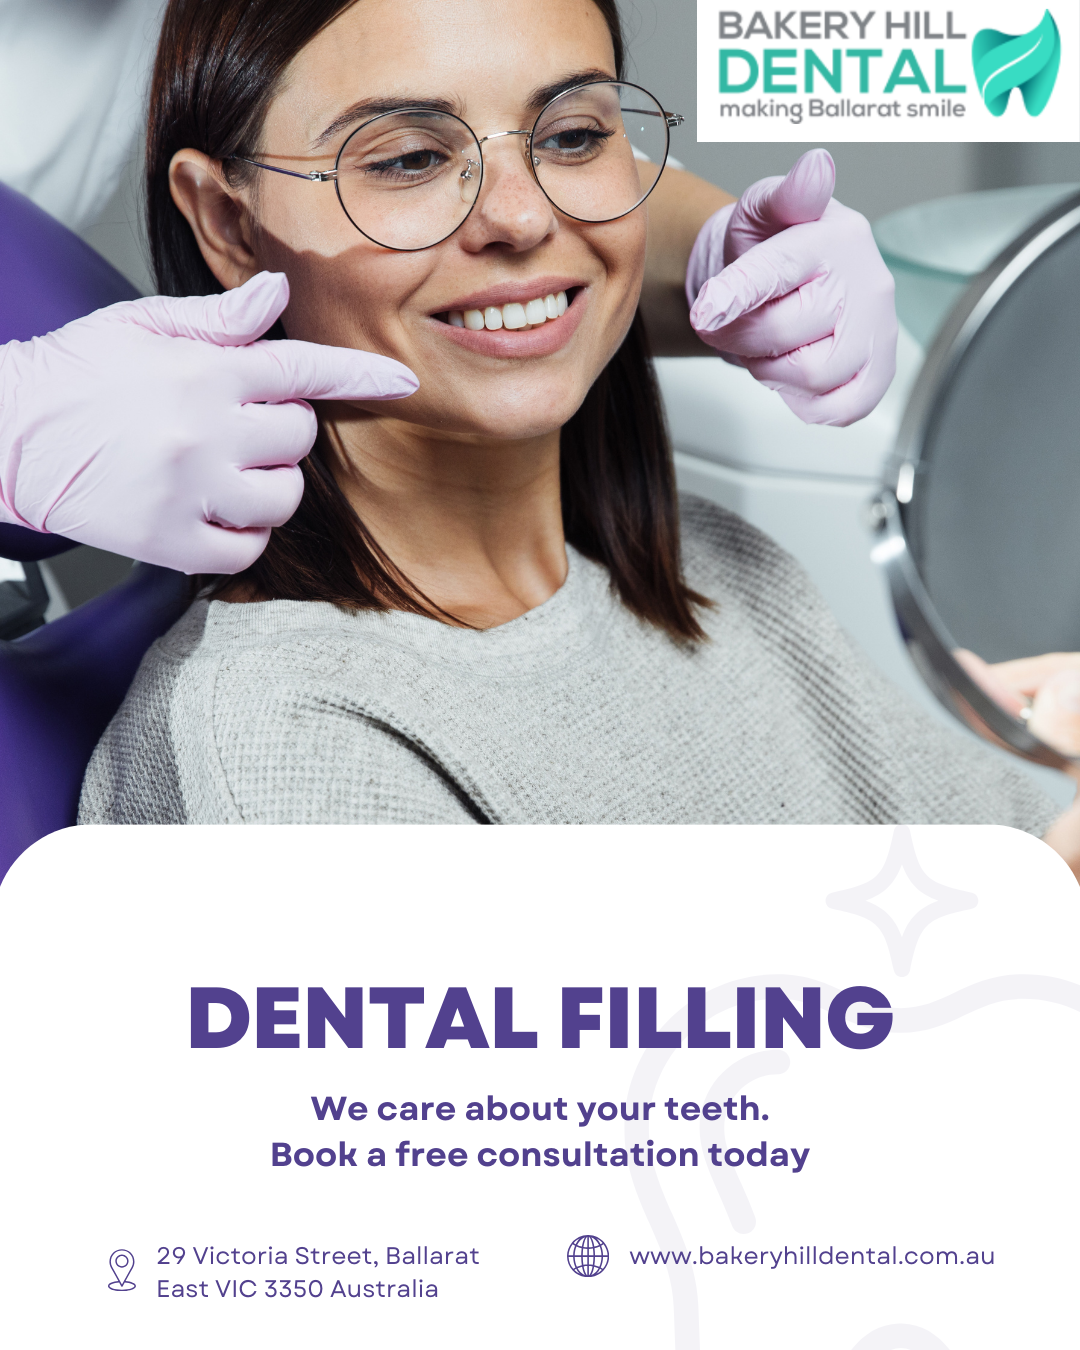 Guide to Choosing a Professional Dental Filling Specialist | TechPlanet